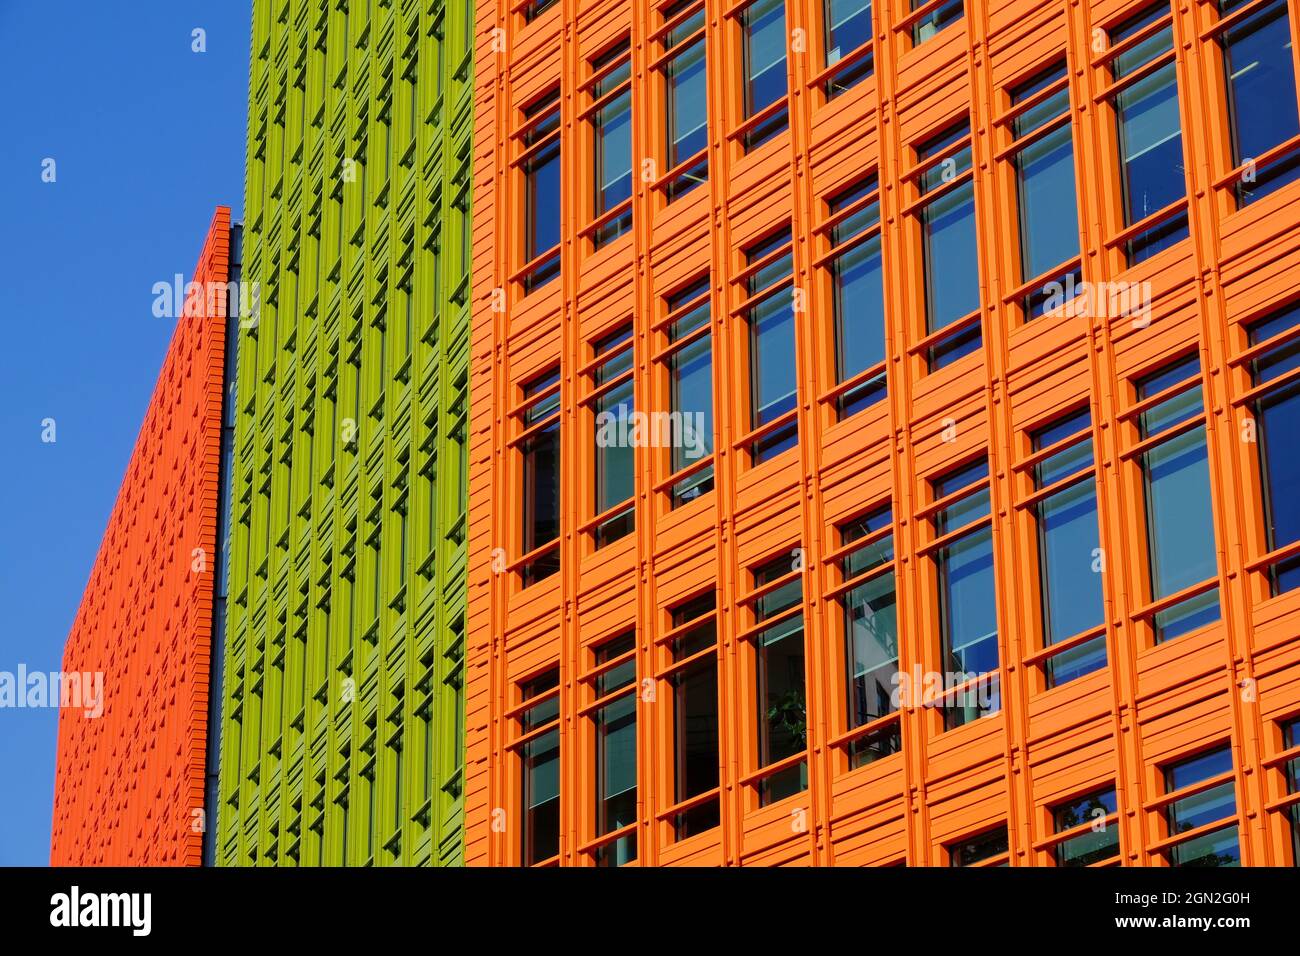 Brightly coloured Central St Giles buildings designed by Renzo Piano at Shaftesbury Ave and High Holborn in London, England Stock Photo